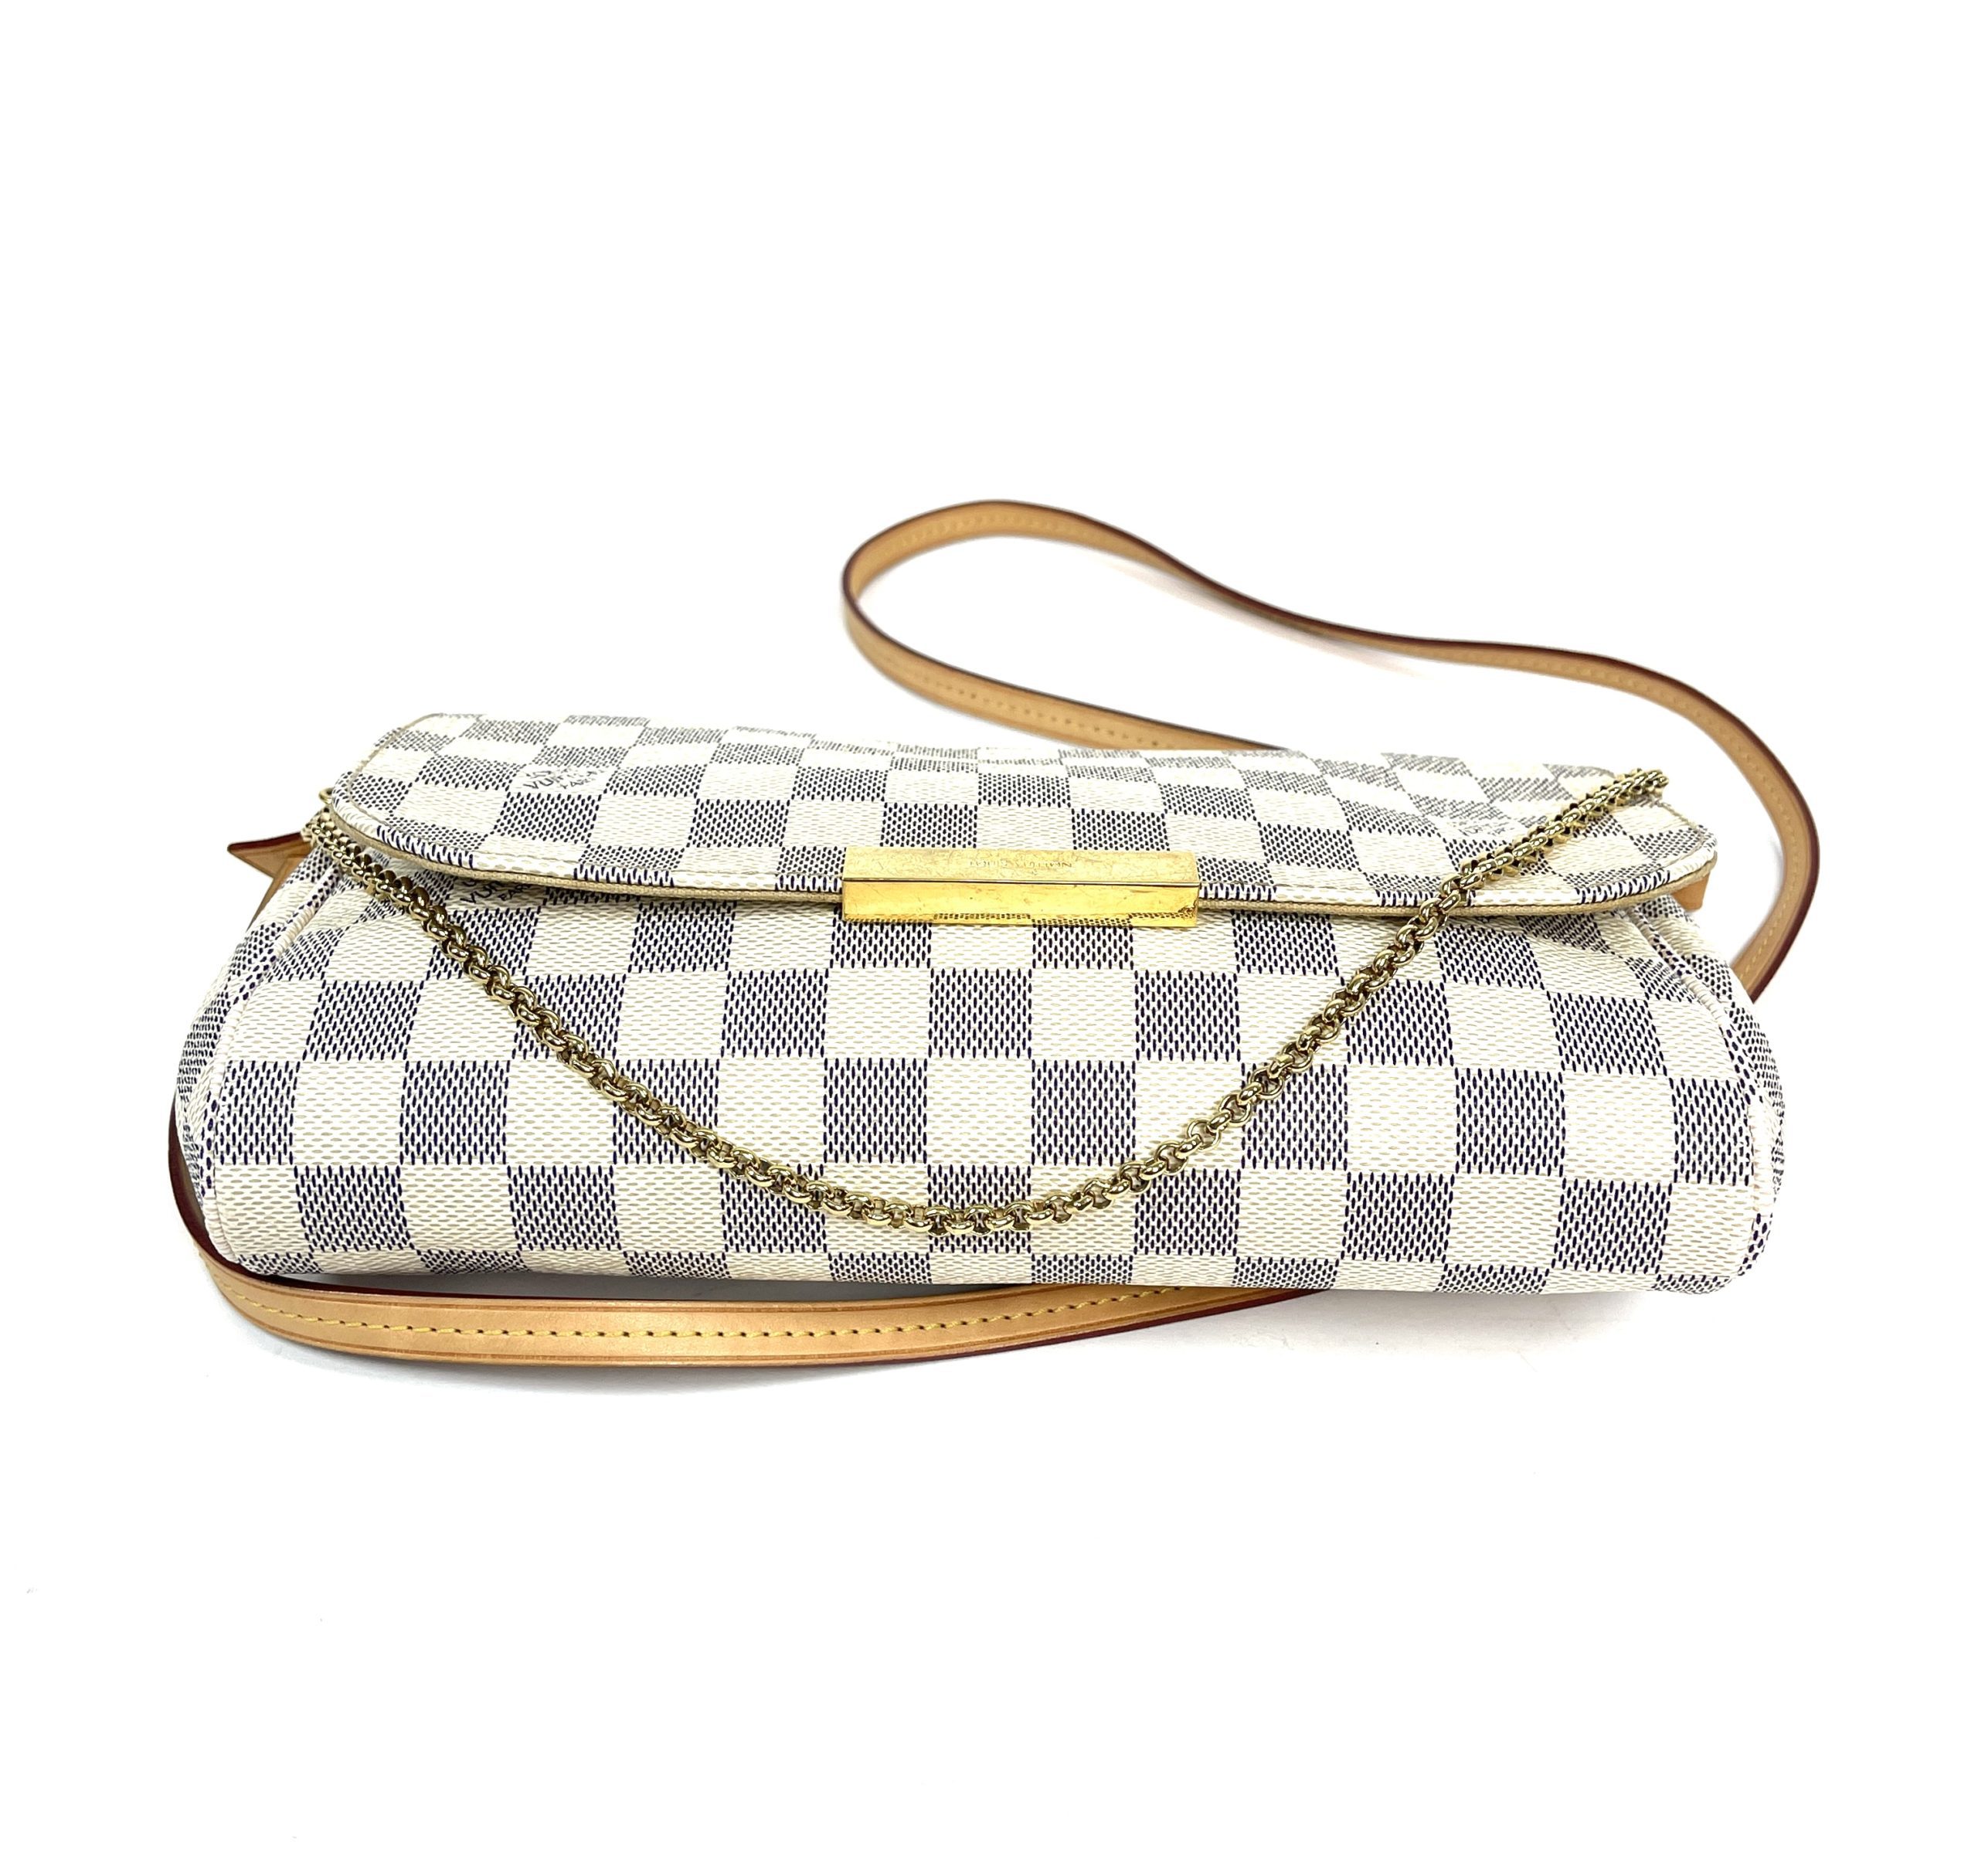 Louis Vuitton Damier Ebene Key Pouch Brown - $250 - From Donna